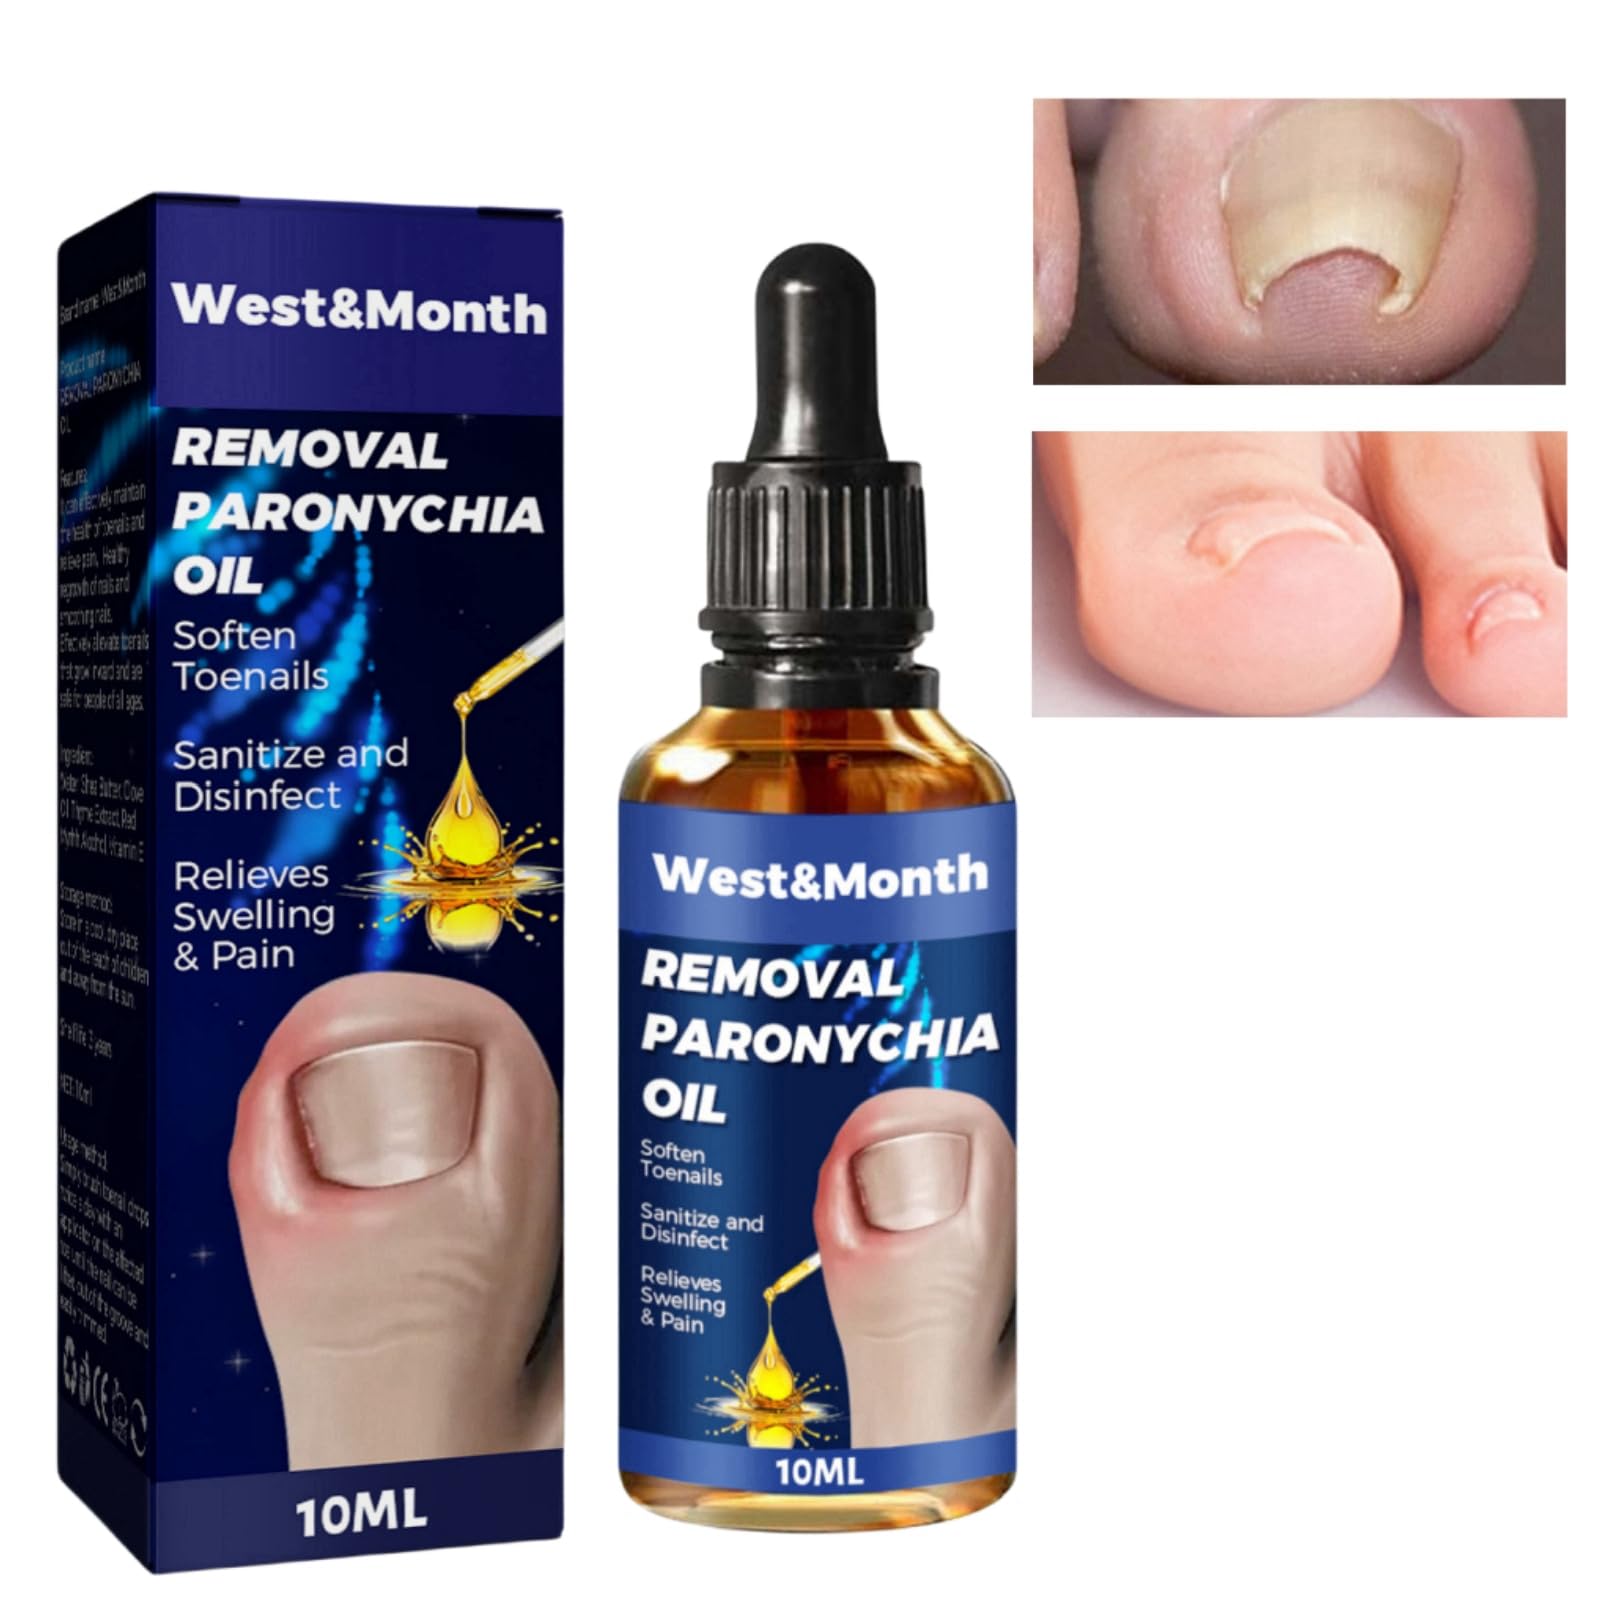 Podiatrist On Call, LLC - PAINLESS and SURGERY-FREE INGROWN TOENAIL  TREATMENT Introducing… The Onyfix nail correction system. It is a versatile  and innovative product that enables completely painless treatment of almost  all